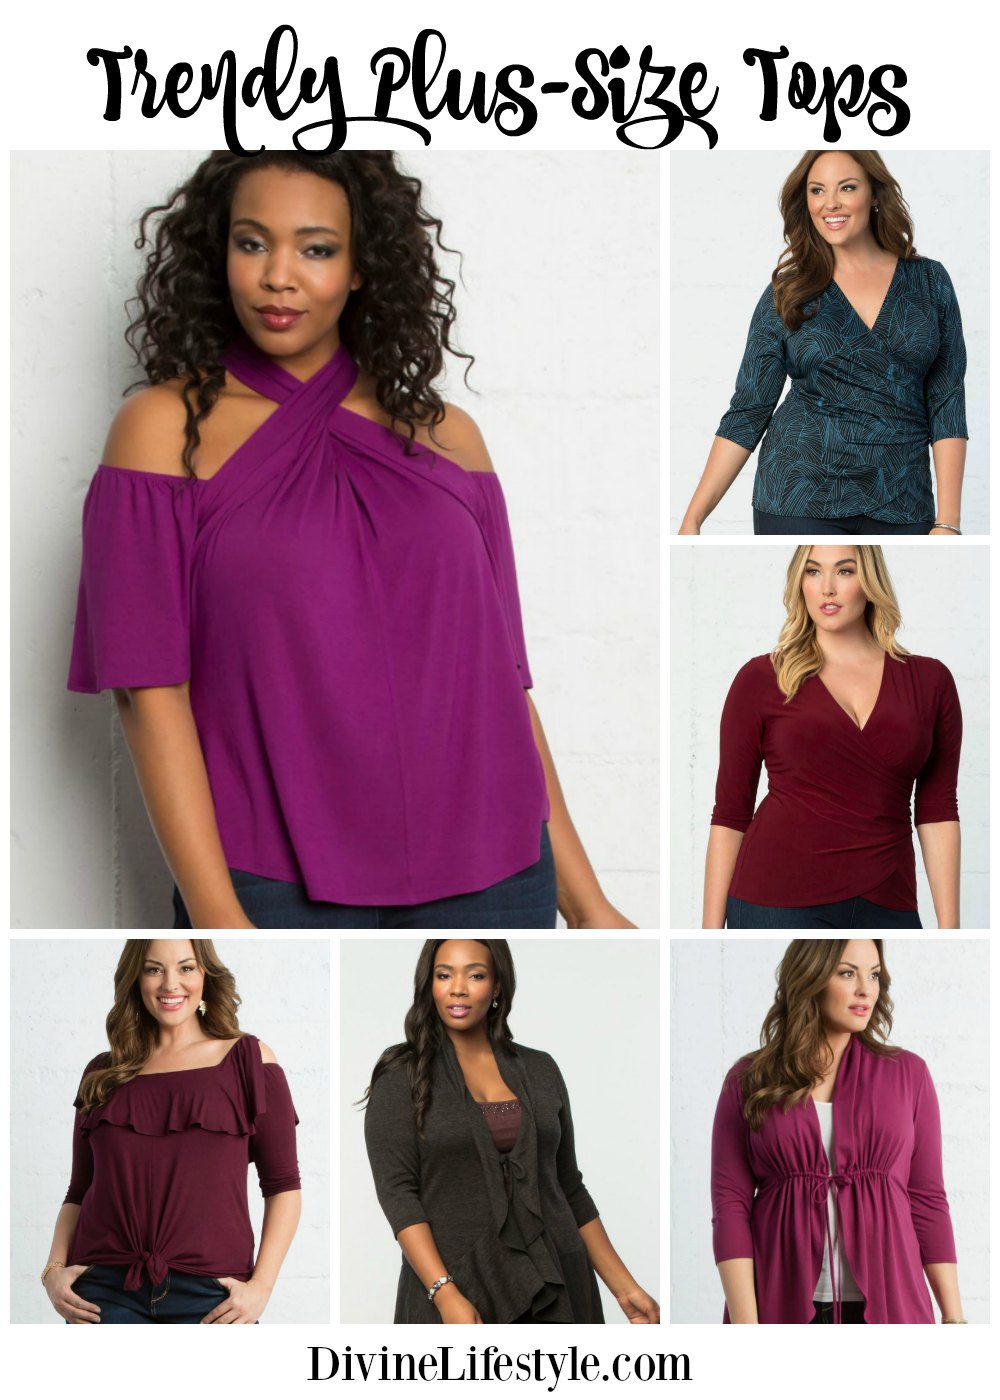 Trendy Plus-Size Tops for Women Fashion Style Divine Lifestyle